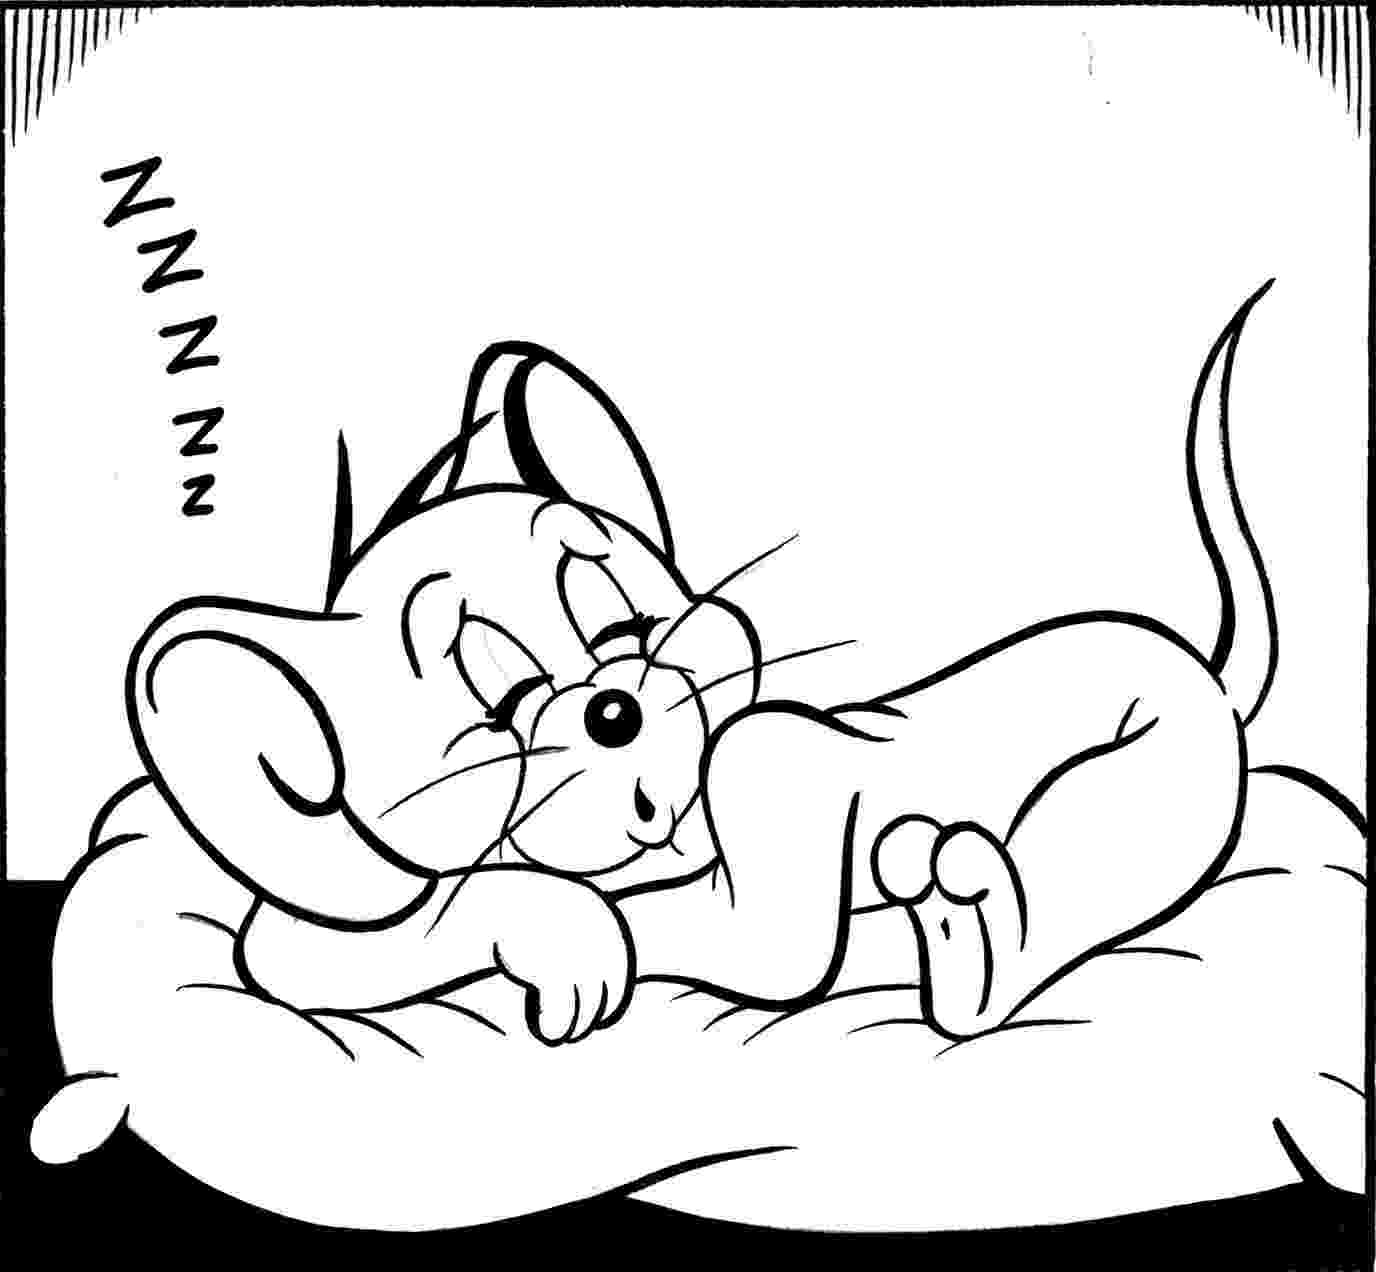 tom and jerry coloring page tom and jerry coloring pages coloring pages to print and tom coloring jerry page 